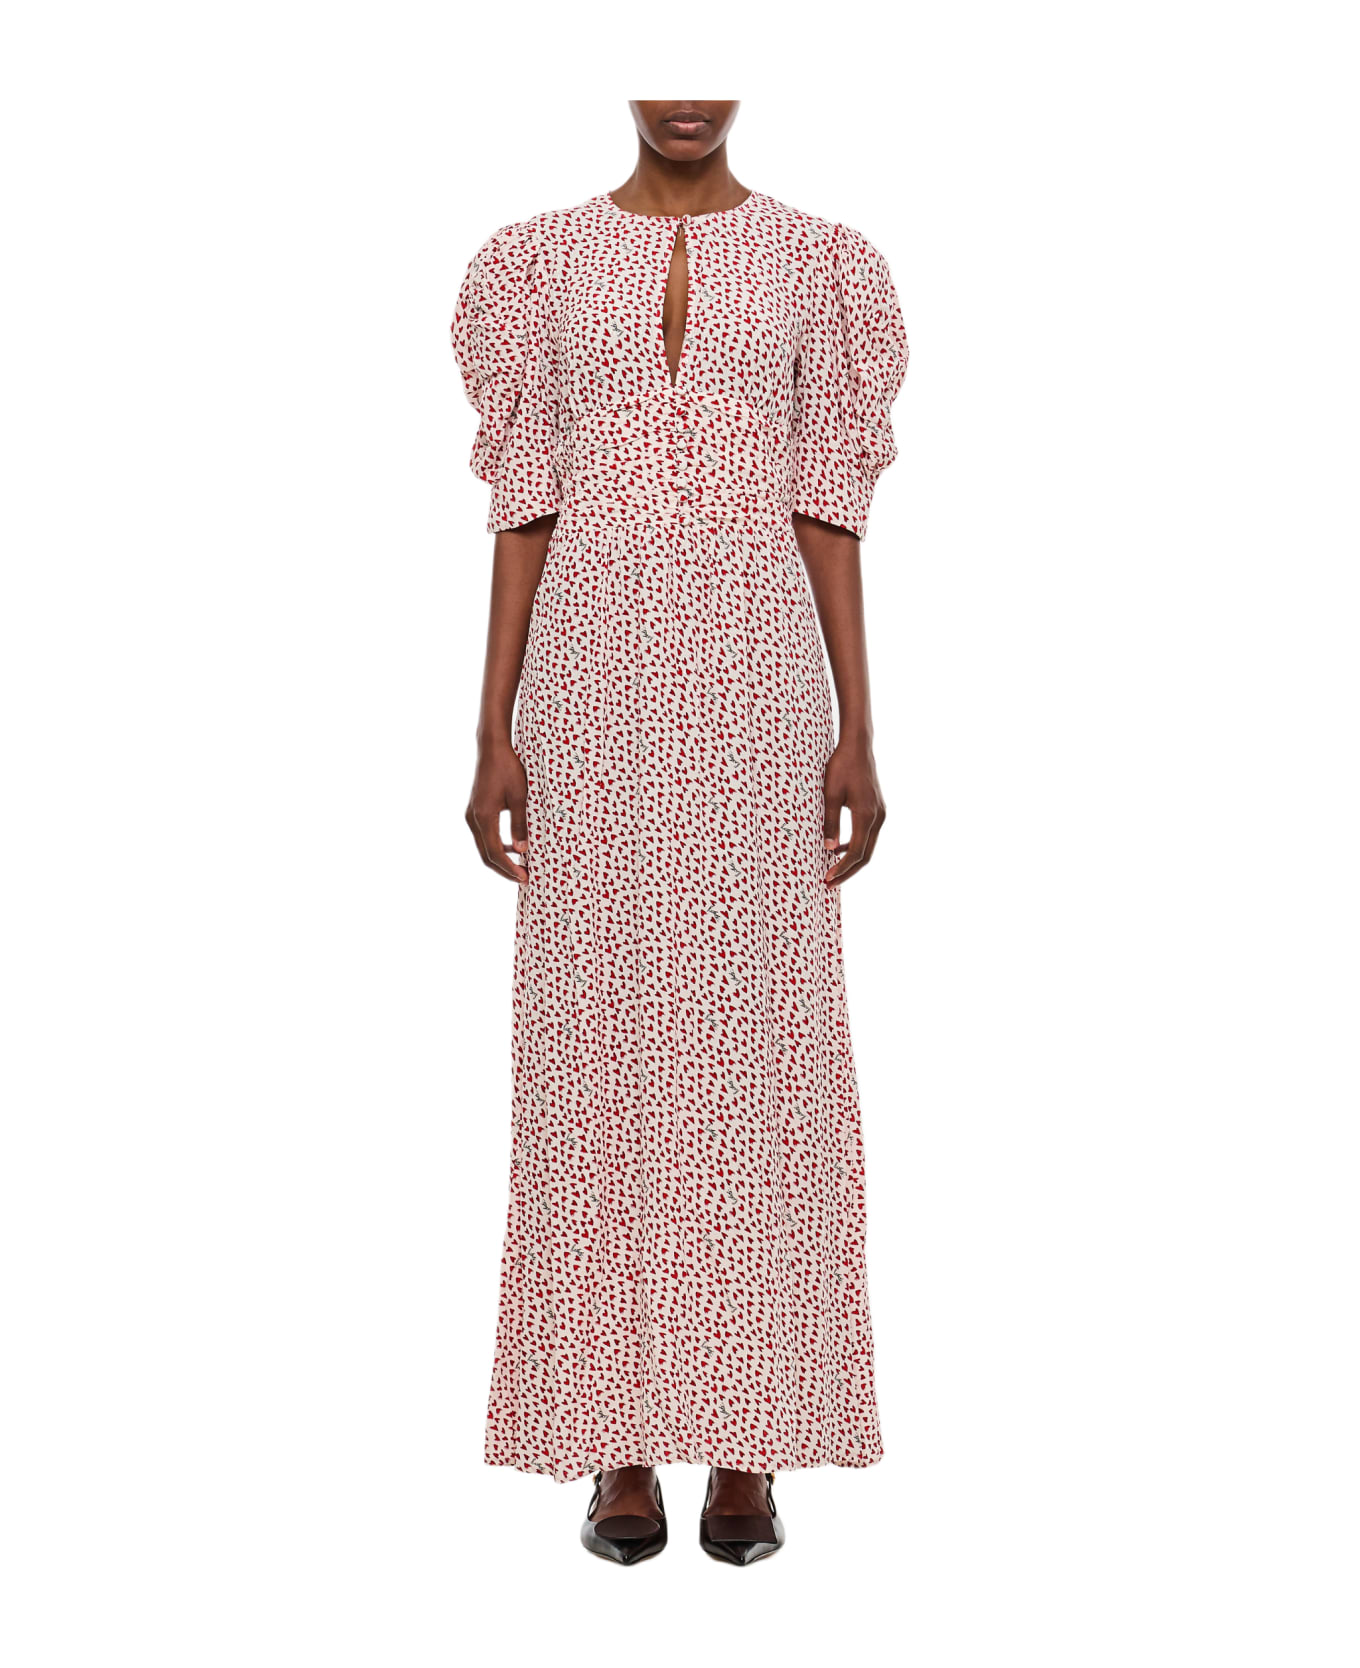 Rotate by Birger Christensen Printed Flowy Maxi Dress - Happy Hearts